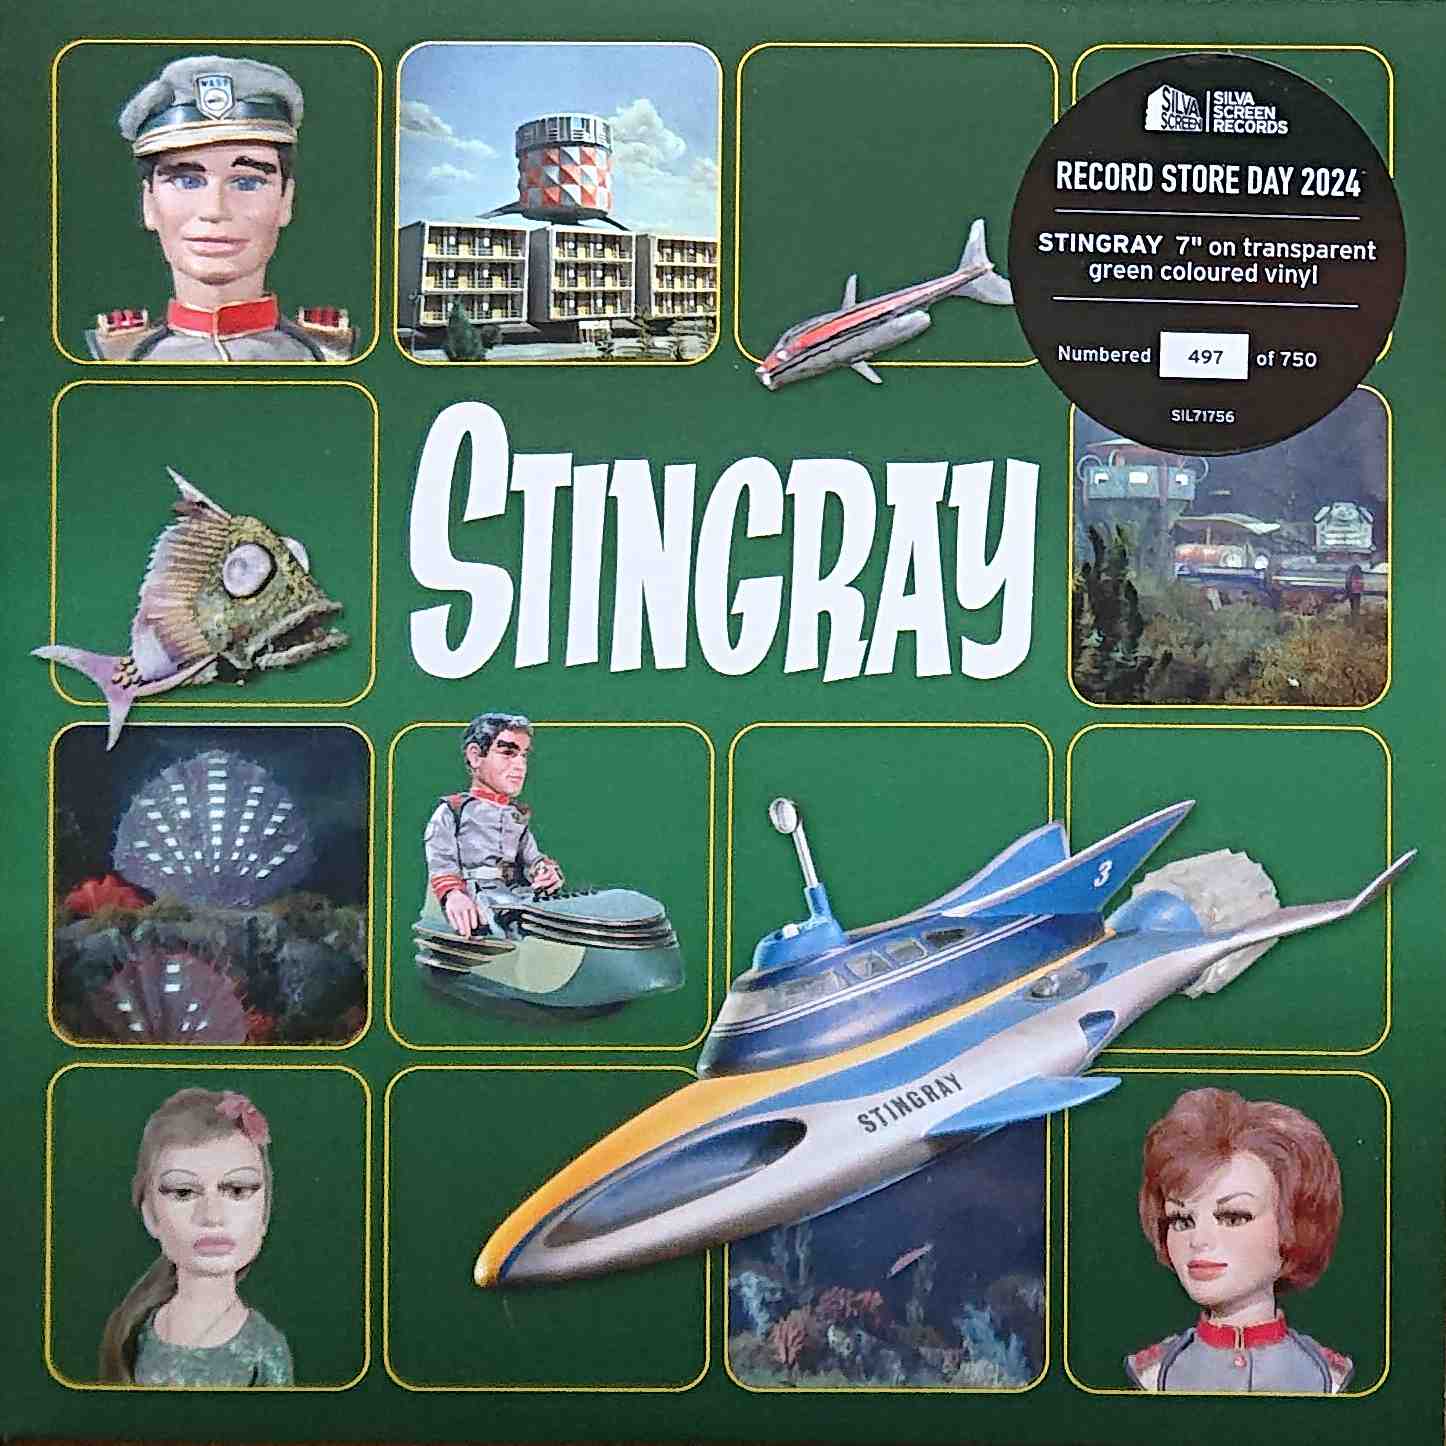 Picture of Stingray - Record Store Day 2024 by artist Barry Gray from ITV, Channel 4 and Channel 5 singles library